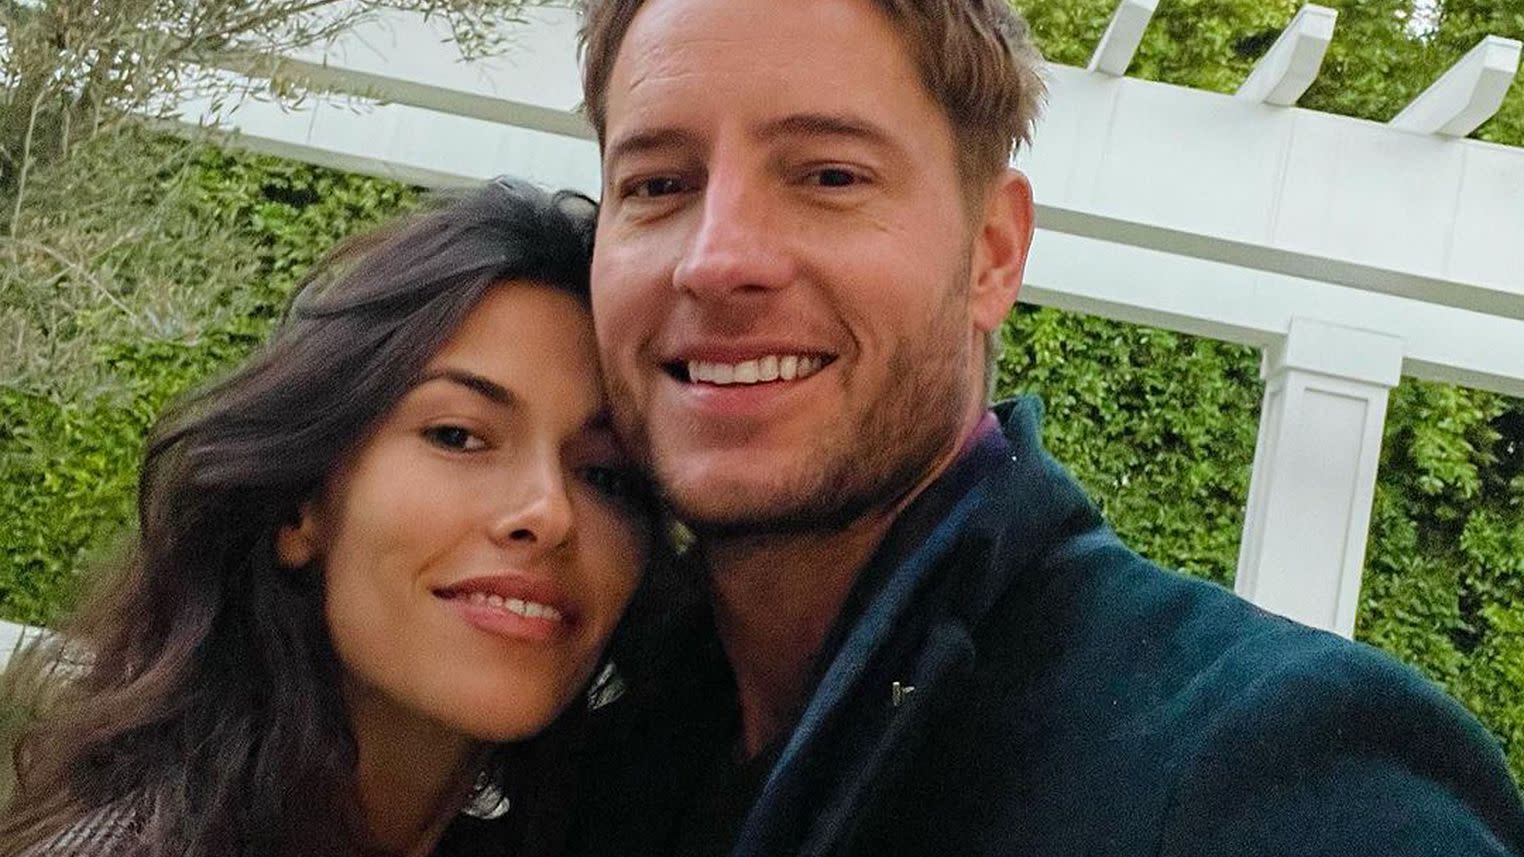 Justin Hartley becomes Instagram official with Sofia Pernas on New Year’s Eve: ‘Bring on 2021!’